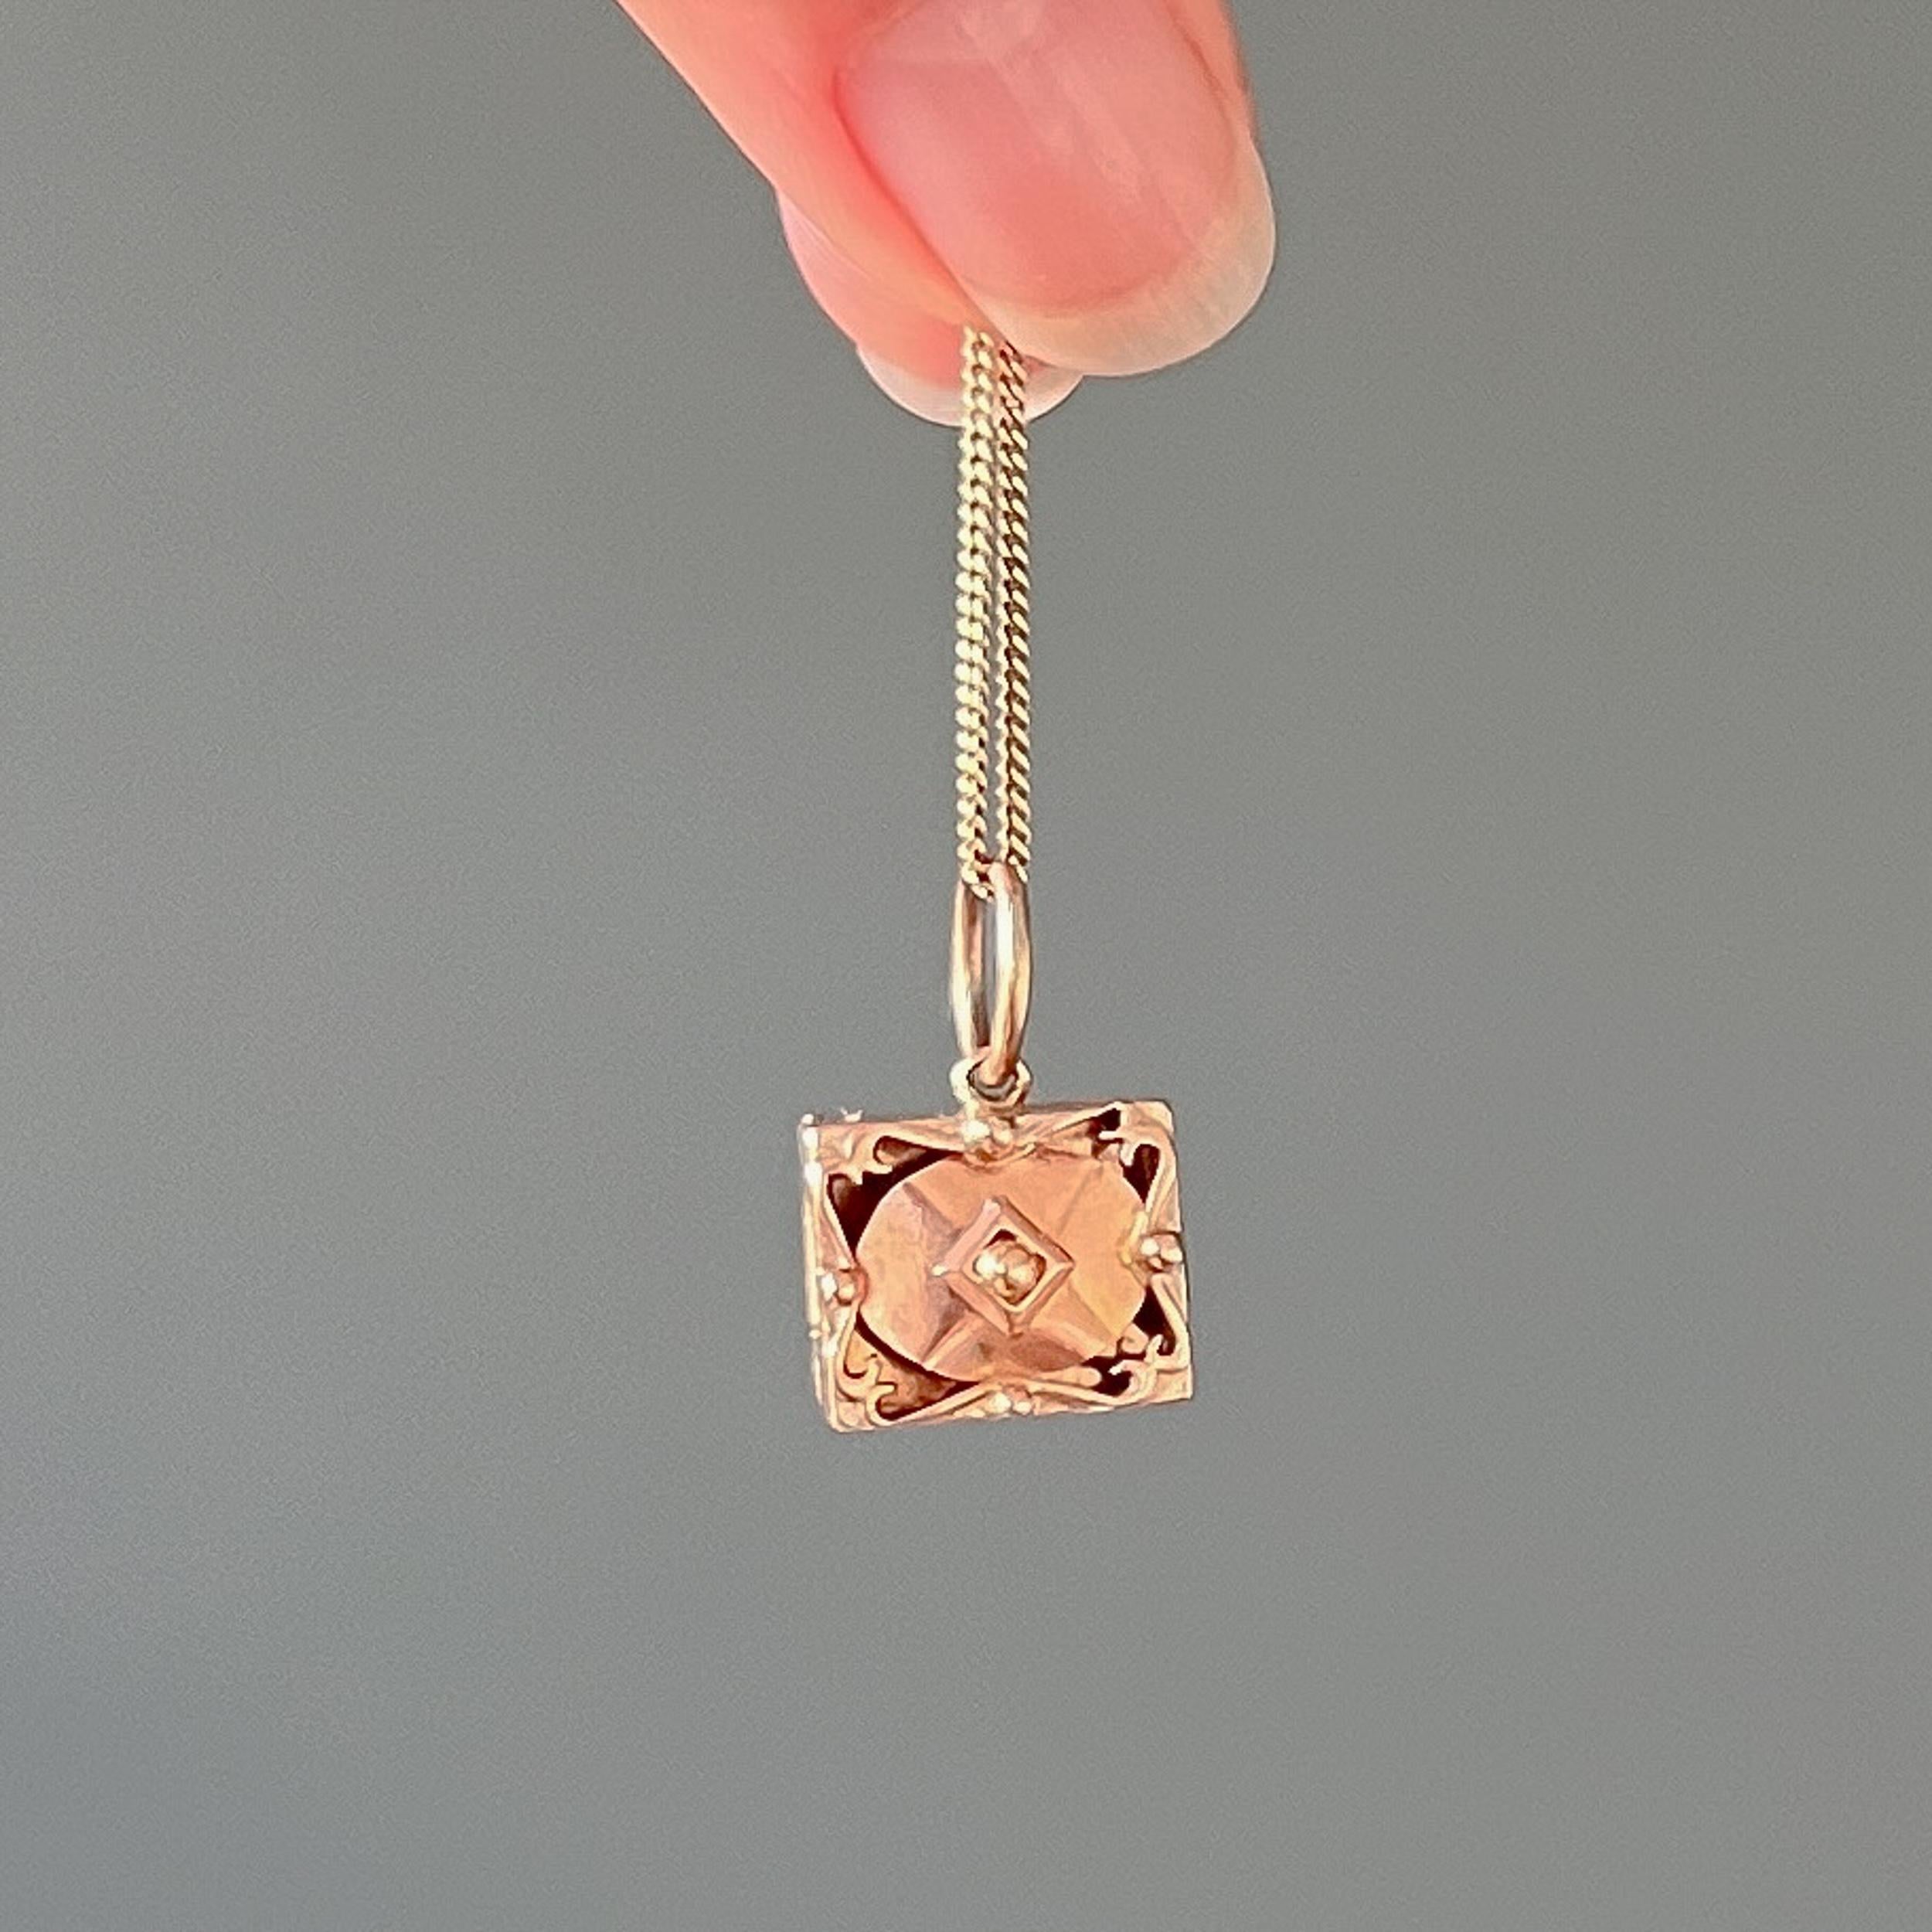 A vintage 9 karat yellow gold box charm pendant. This charm is nicely detailed and beautifully made with gold and rose gold tones. The front has an openwork design and features raised gold details. The box can be opened and closed - you can put a